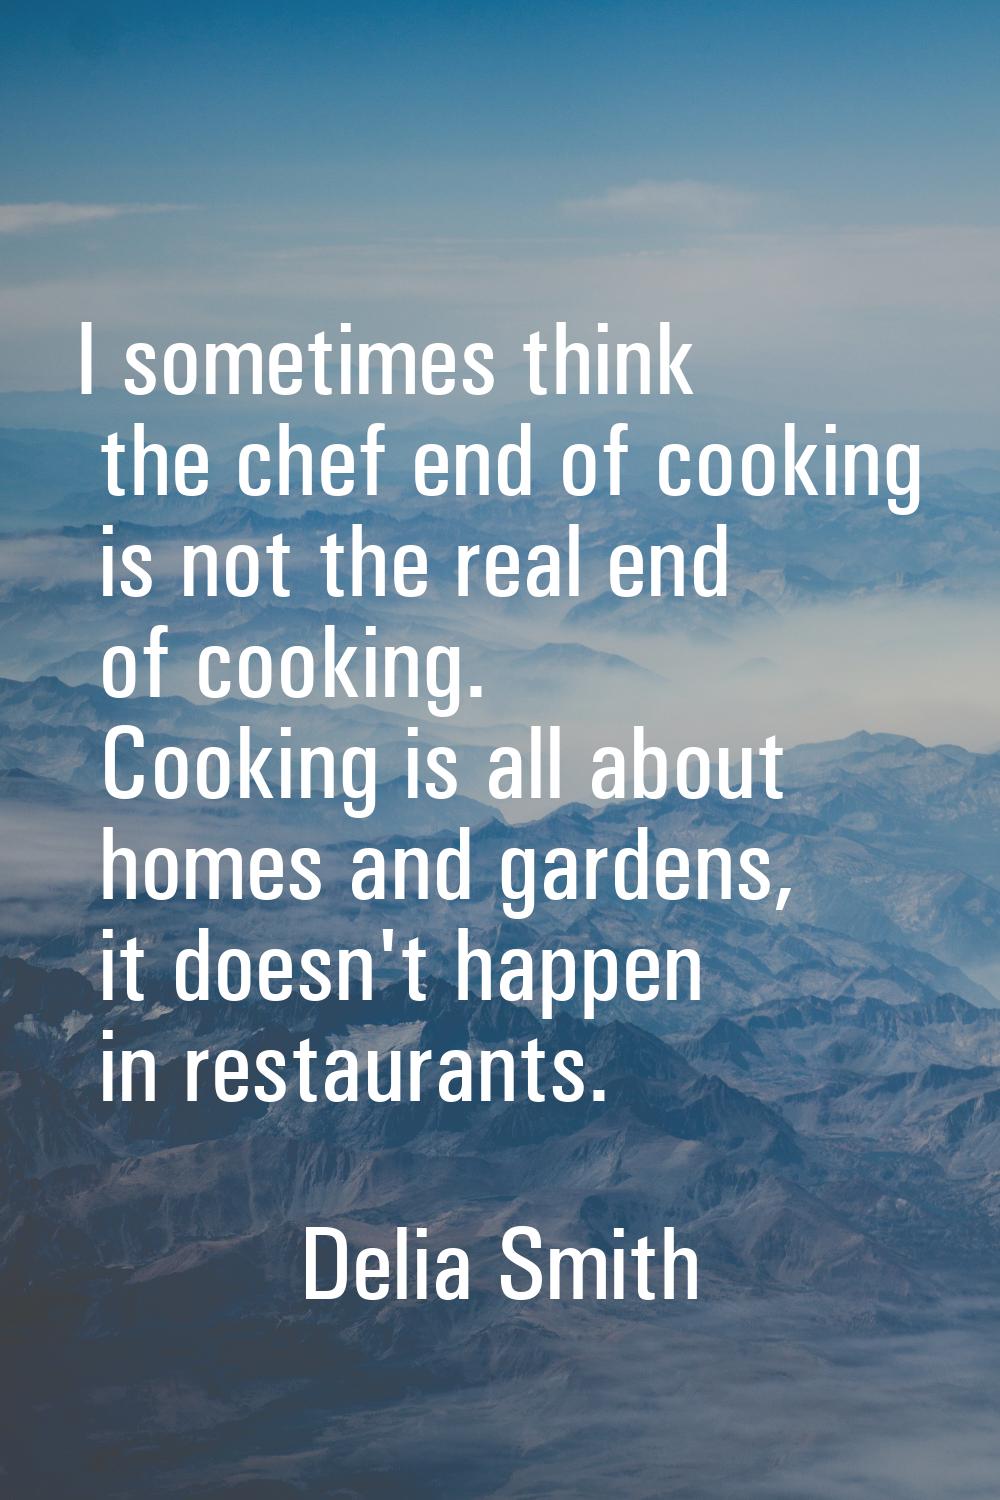 I sometimes think the chef end of cooking is not the real end of cooking. Cooking is all about home